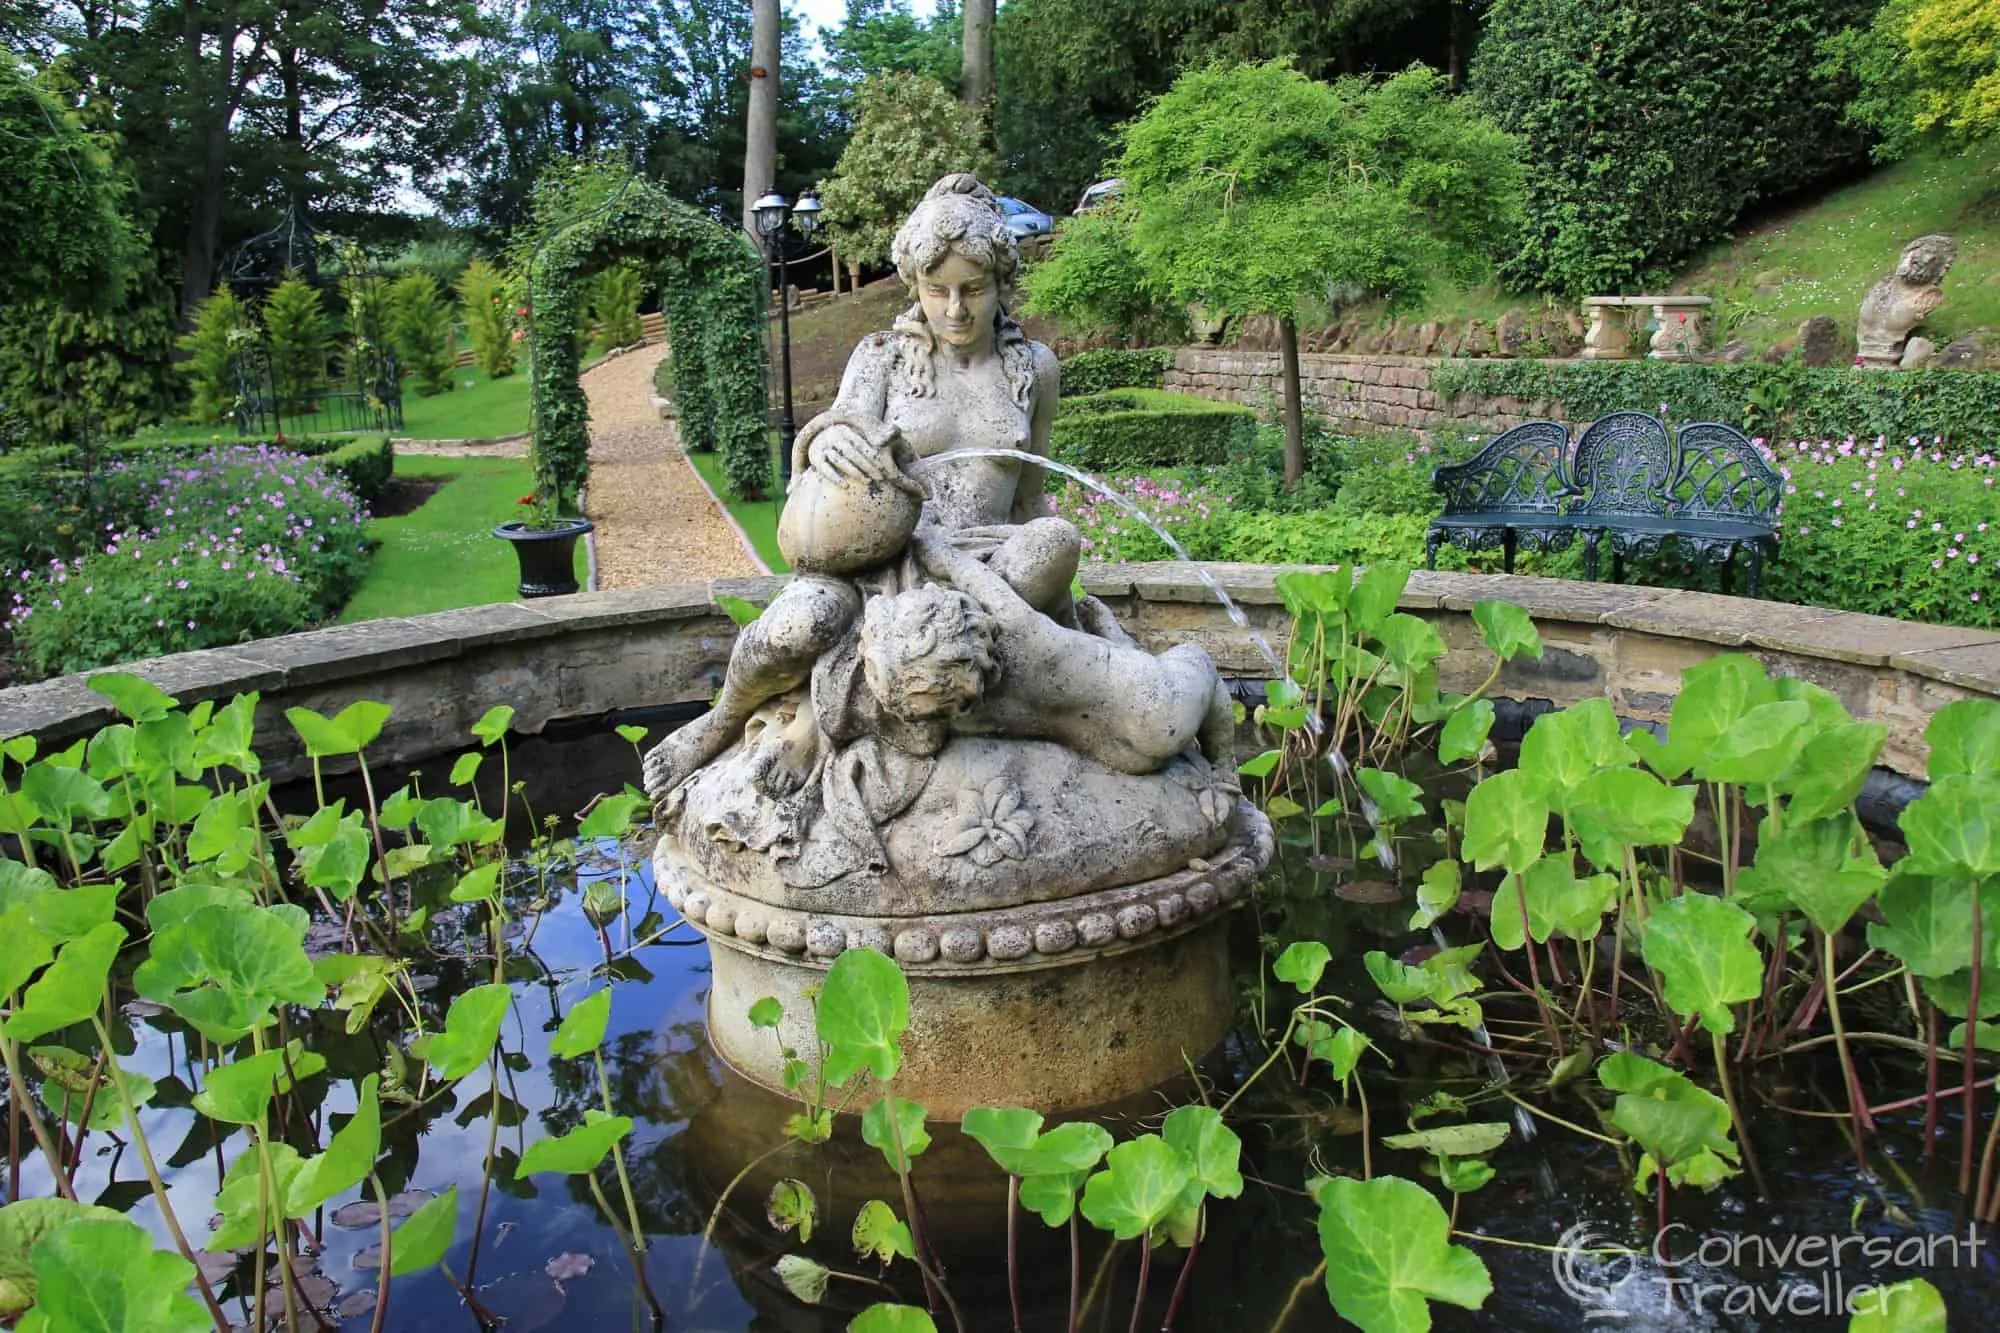 Just one of the statues and fountains in the gardens